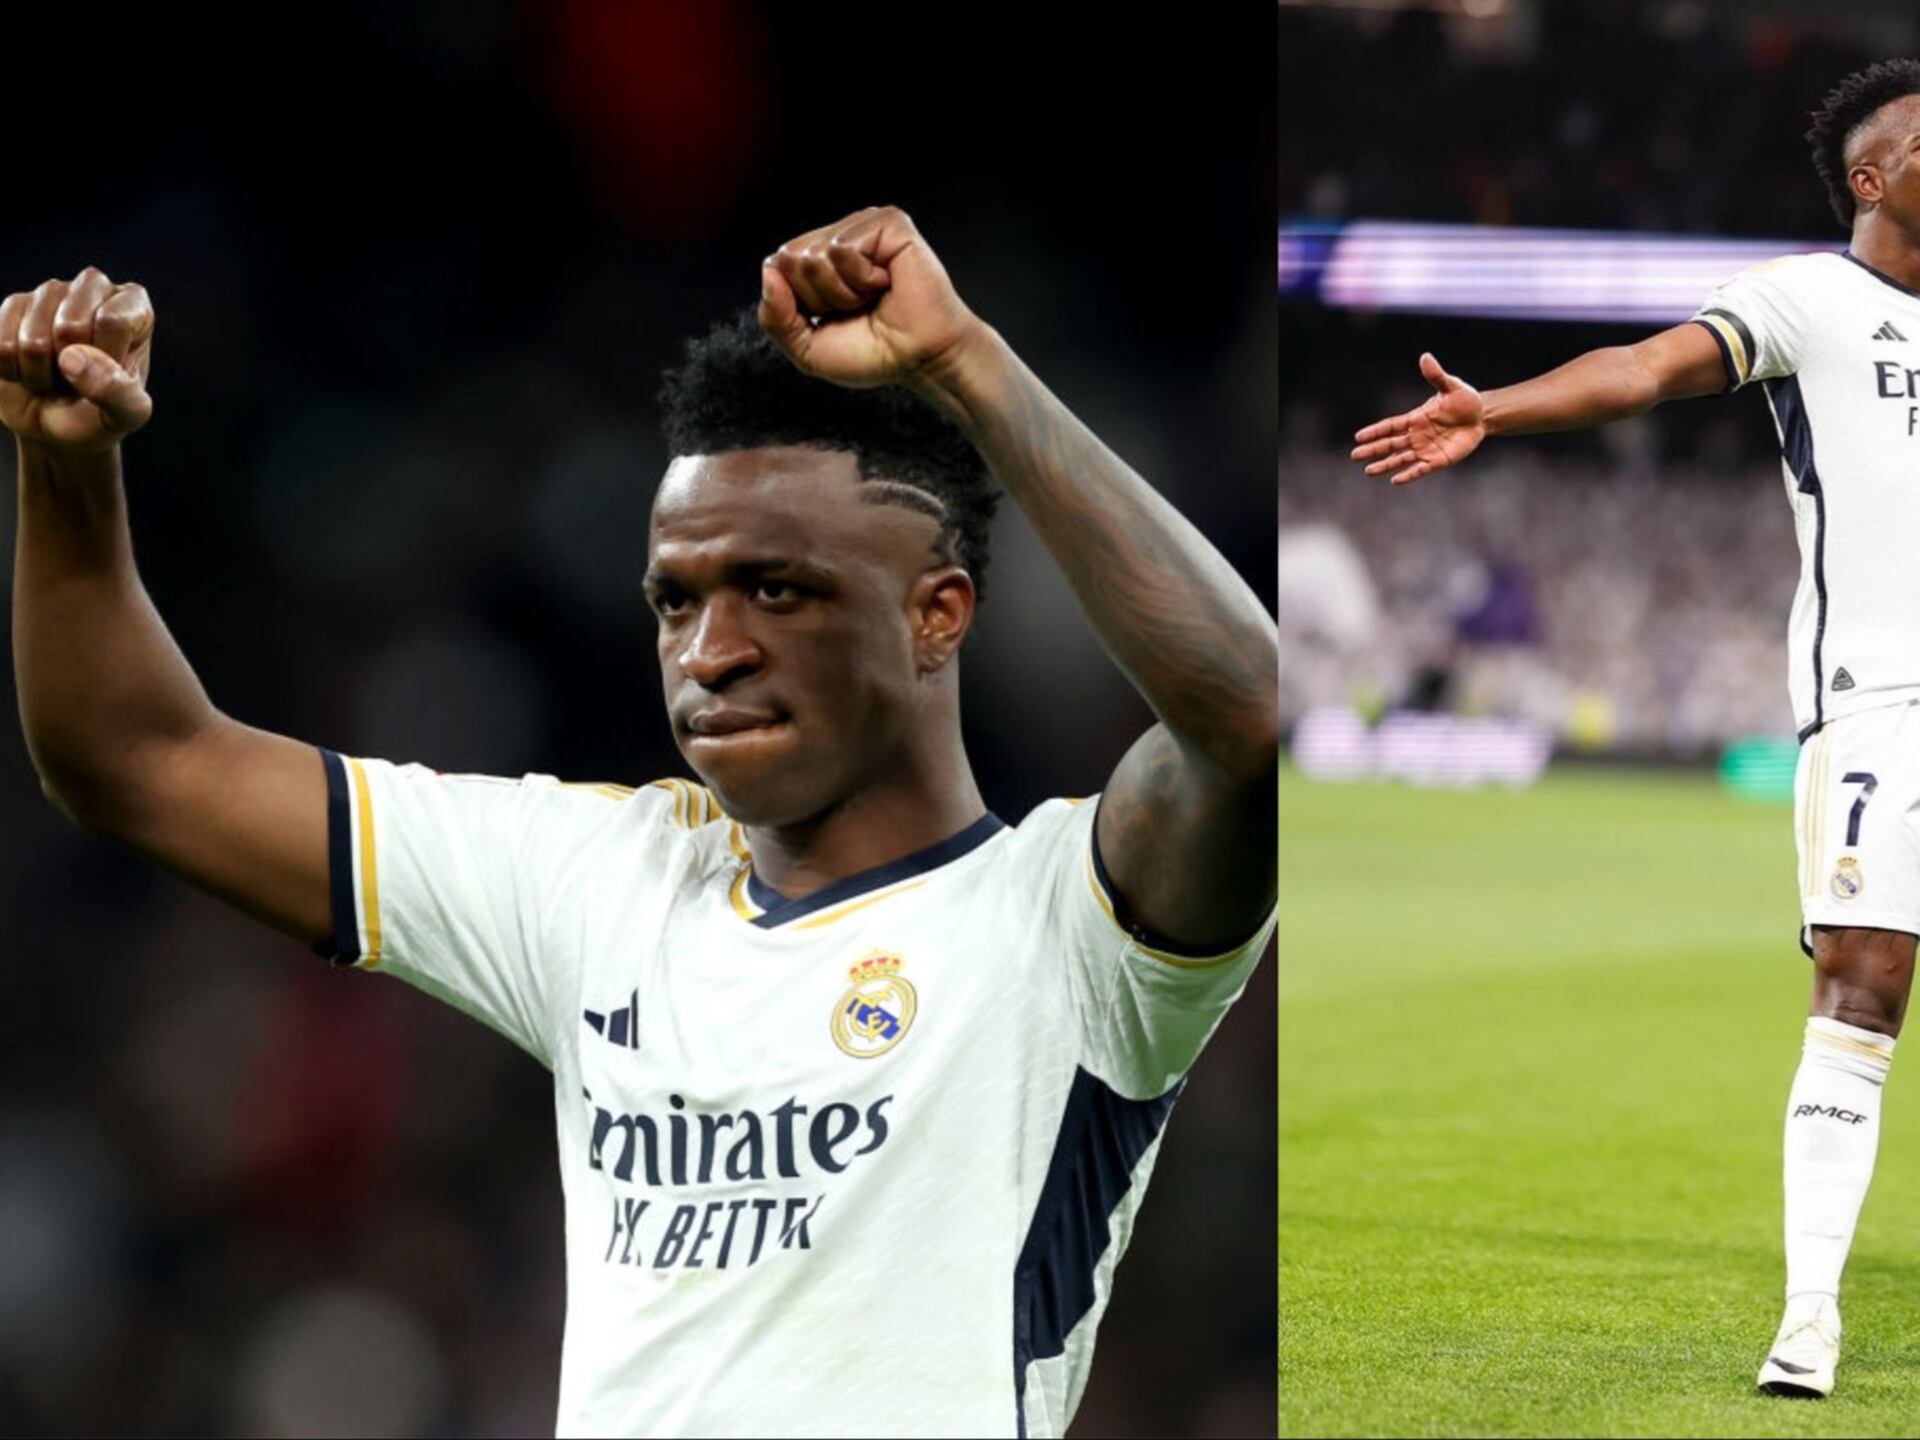 Not just Ancelotti, Vinicius Jr gets more recognition after Real Madrid 4-0 win